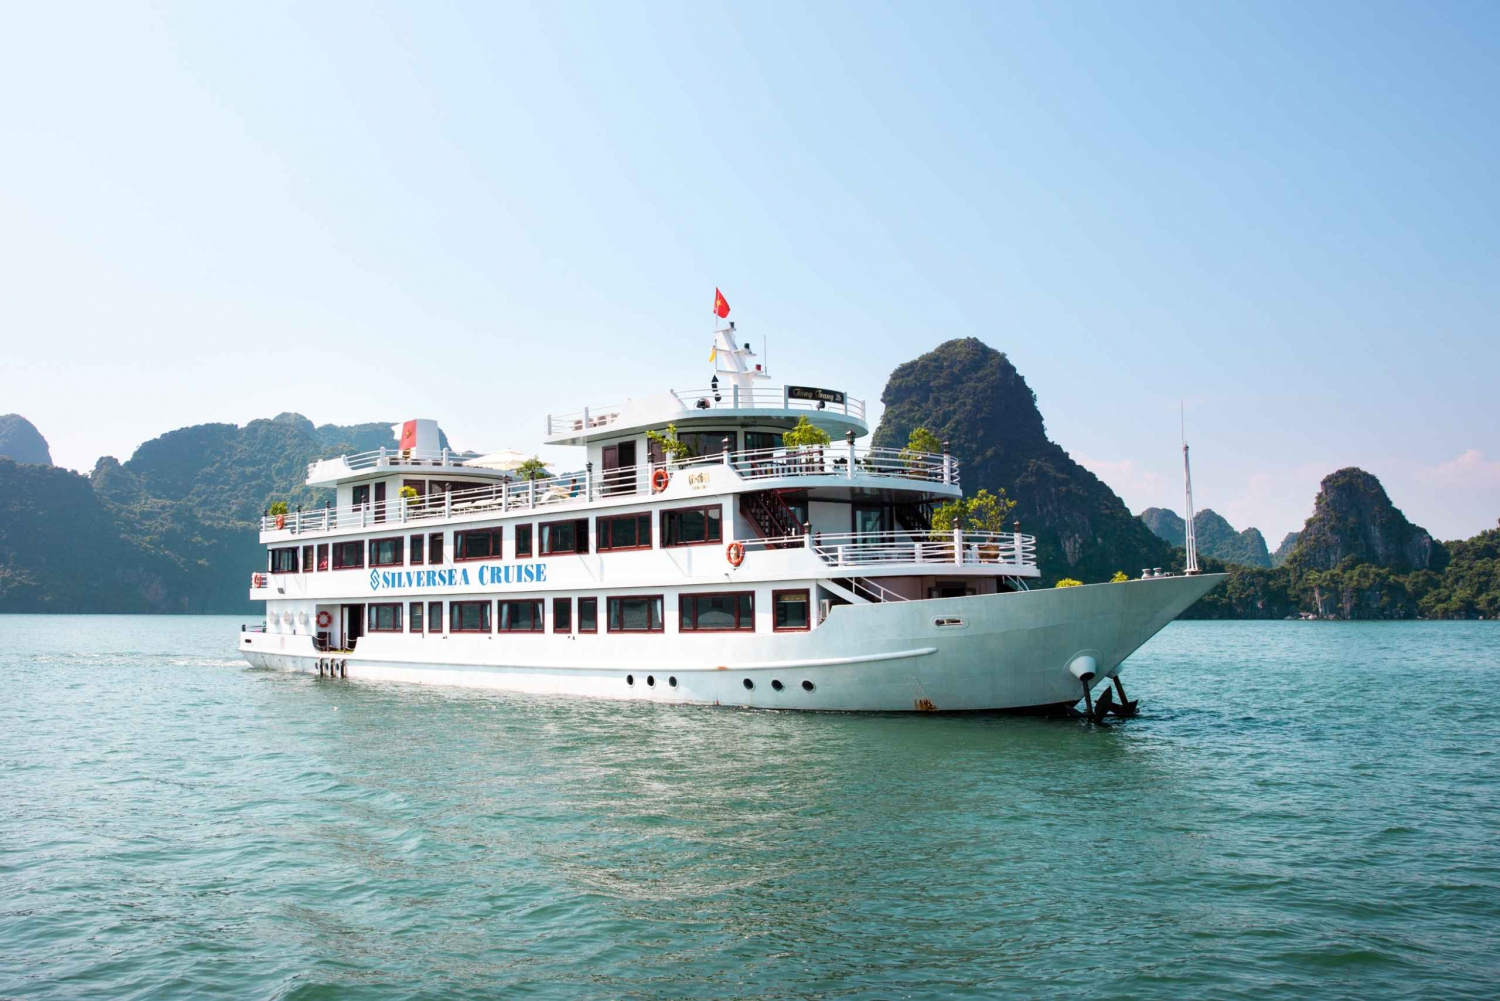 Halong Bay: Overnight Cruise With Meals